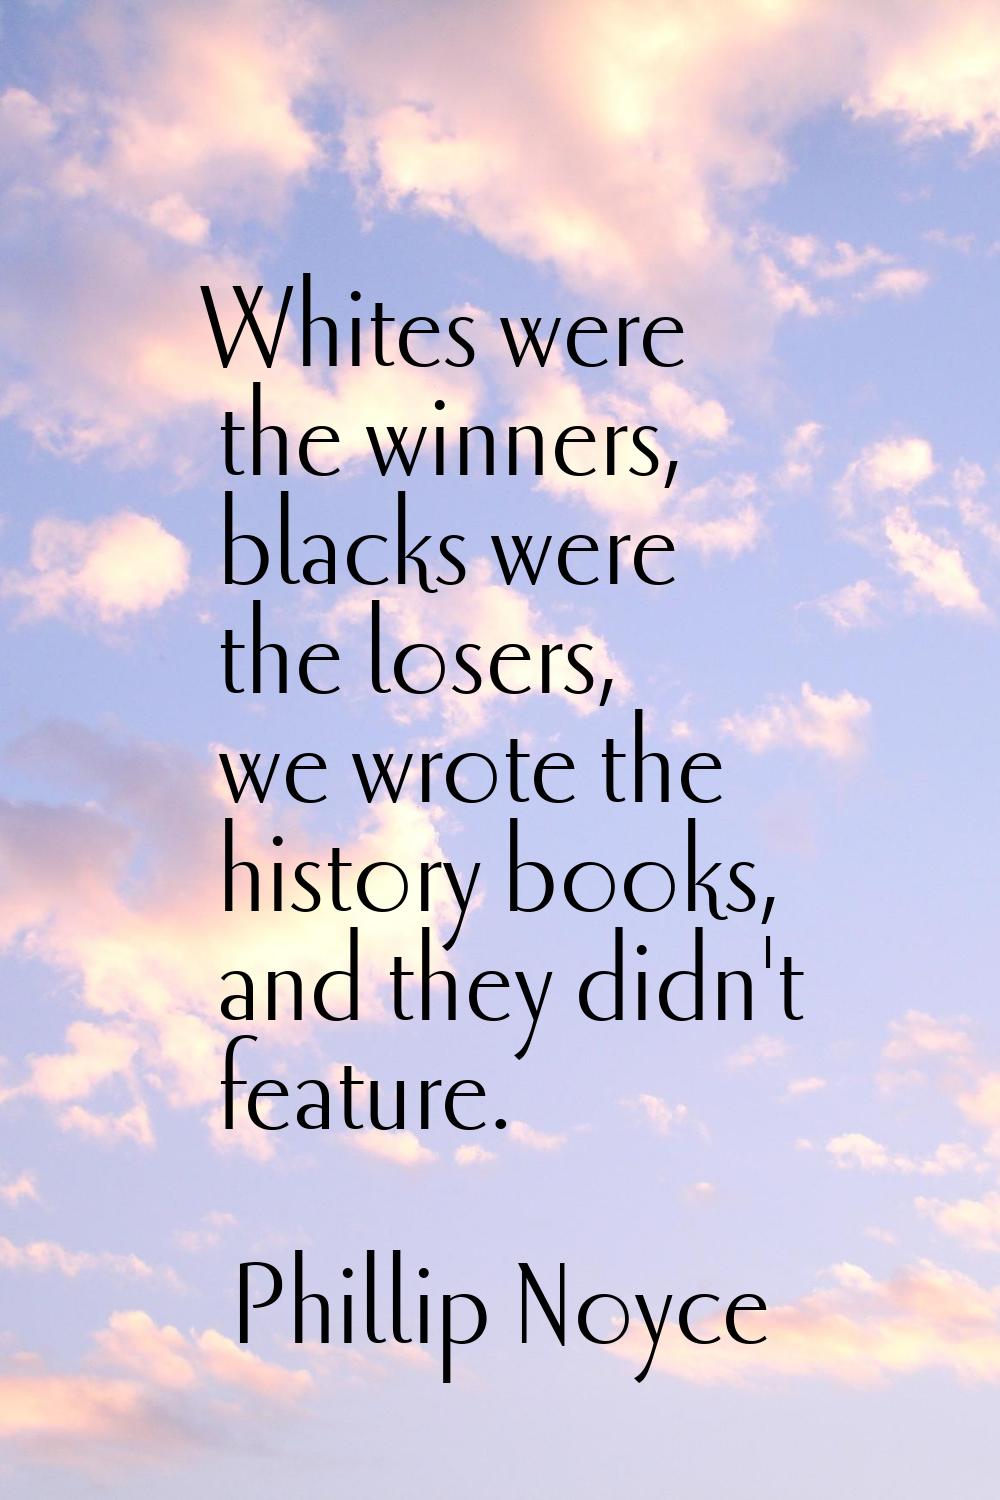 Whites were the winners, blacks were the losers, we wrote the history books, and they didn't featur